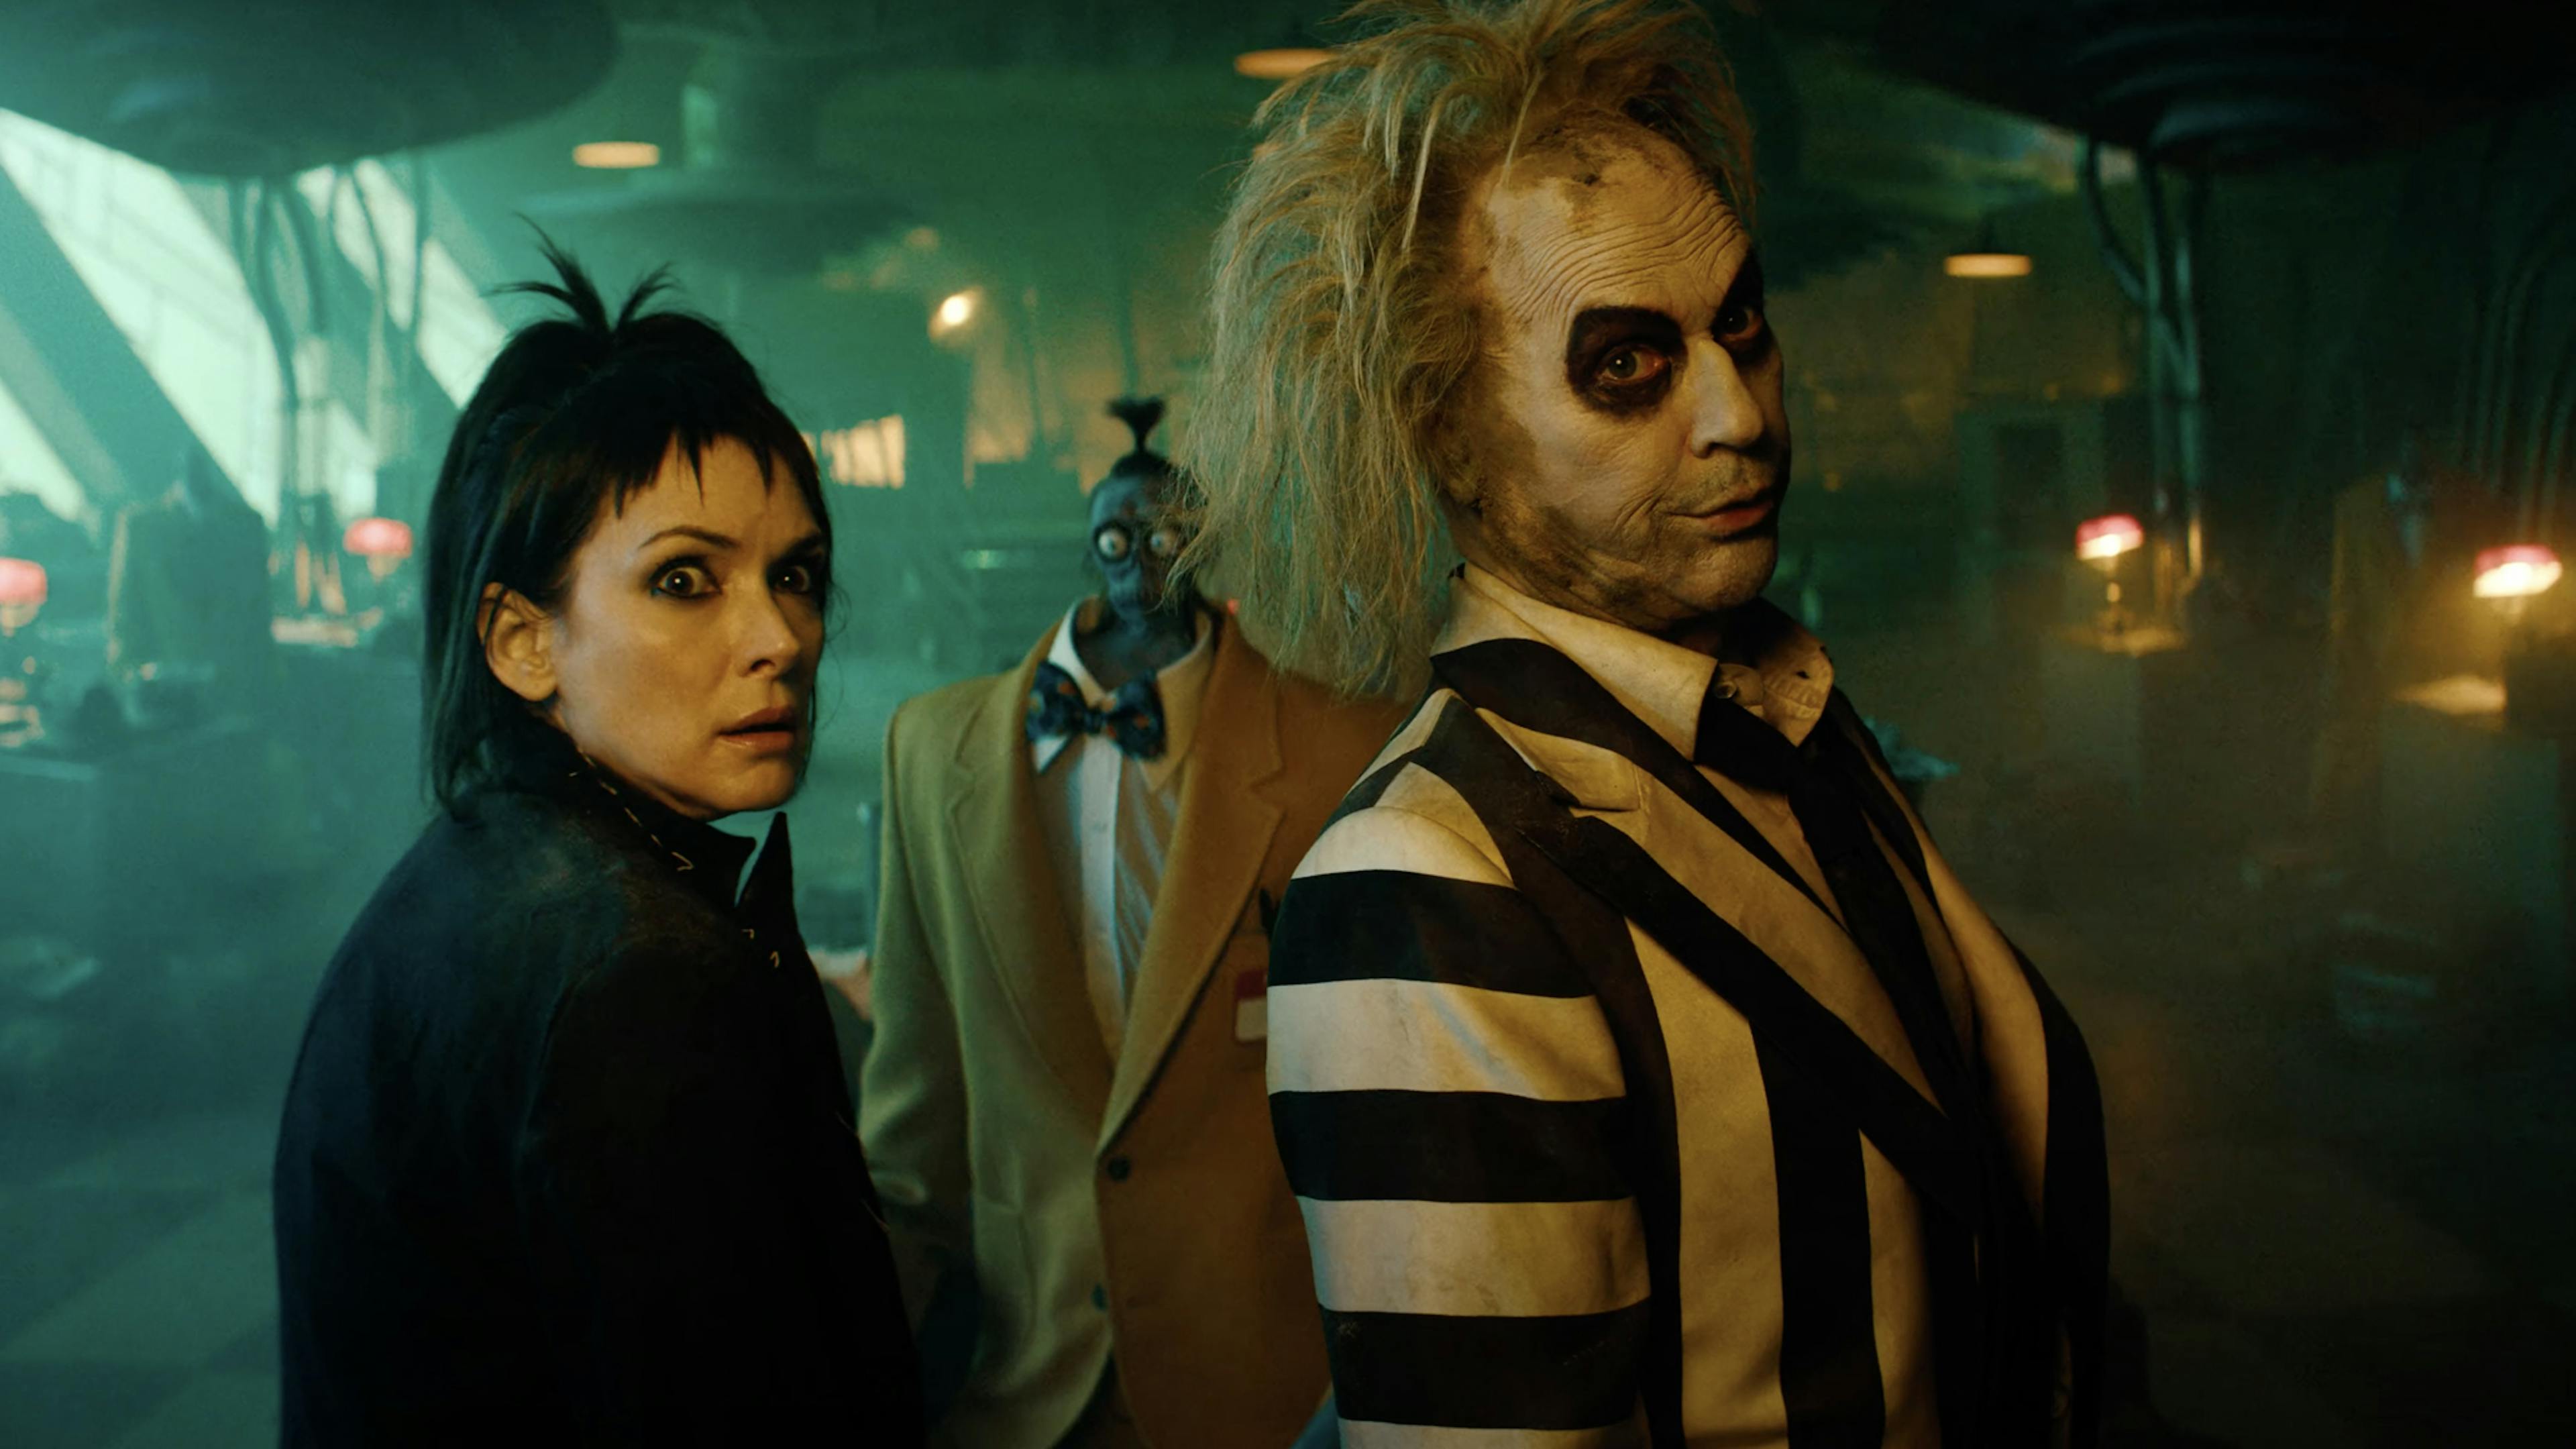 There’s a new trailer and movie poster for Beetlejuice Beetlejuice